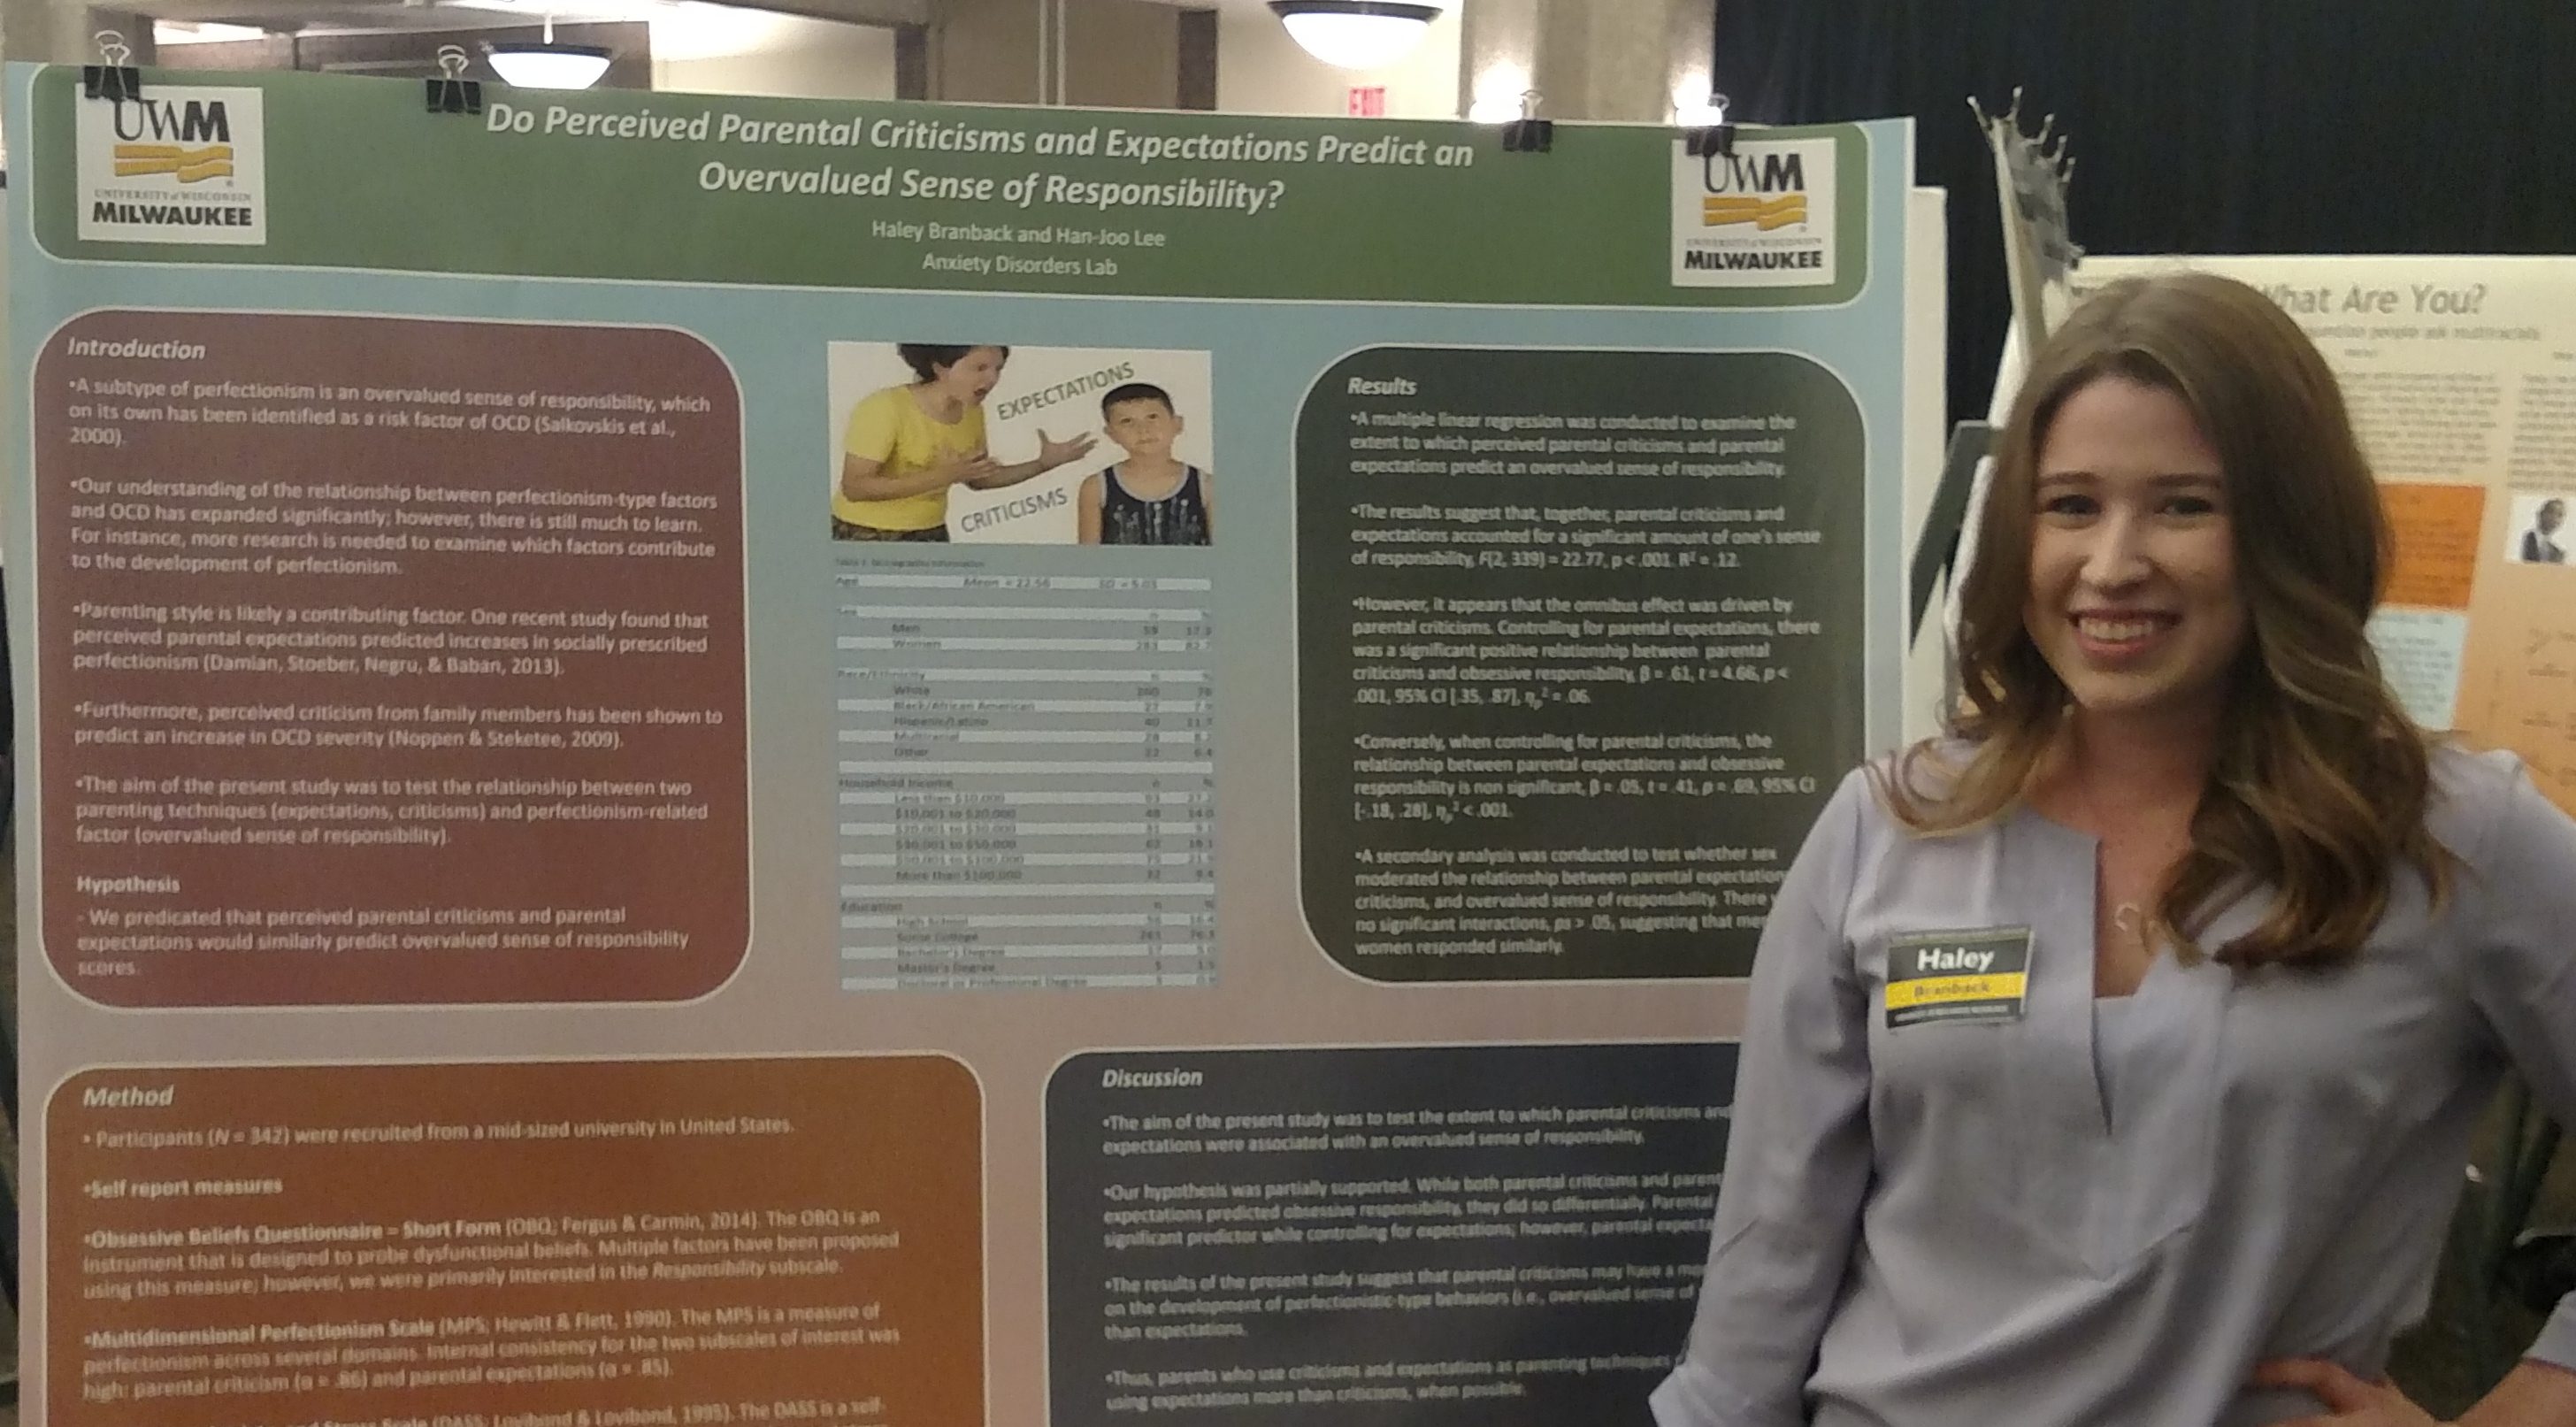 Undergraduate psychology student Haley Branback presented her research on the effects of parental criticism at UW-Milwaukee’s Undergraduate Research Symposium. (Photo courtesy of Haley Branback)